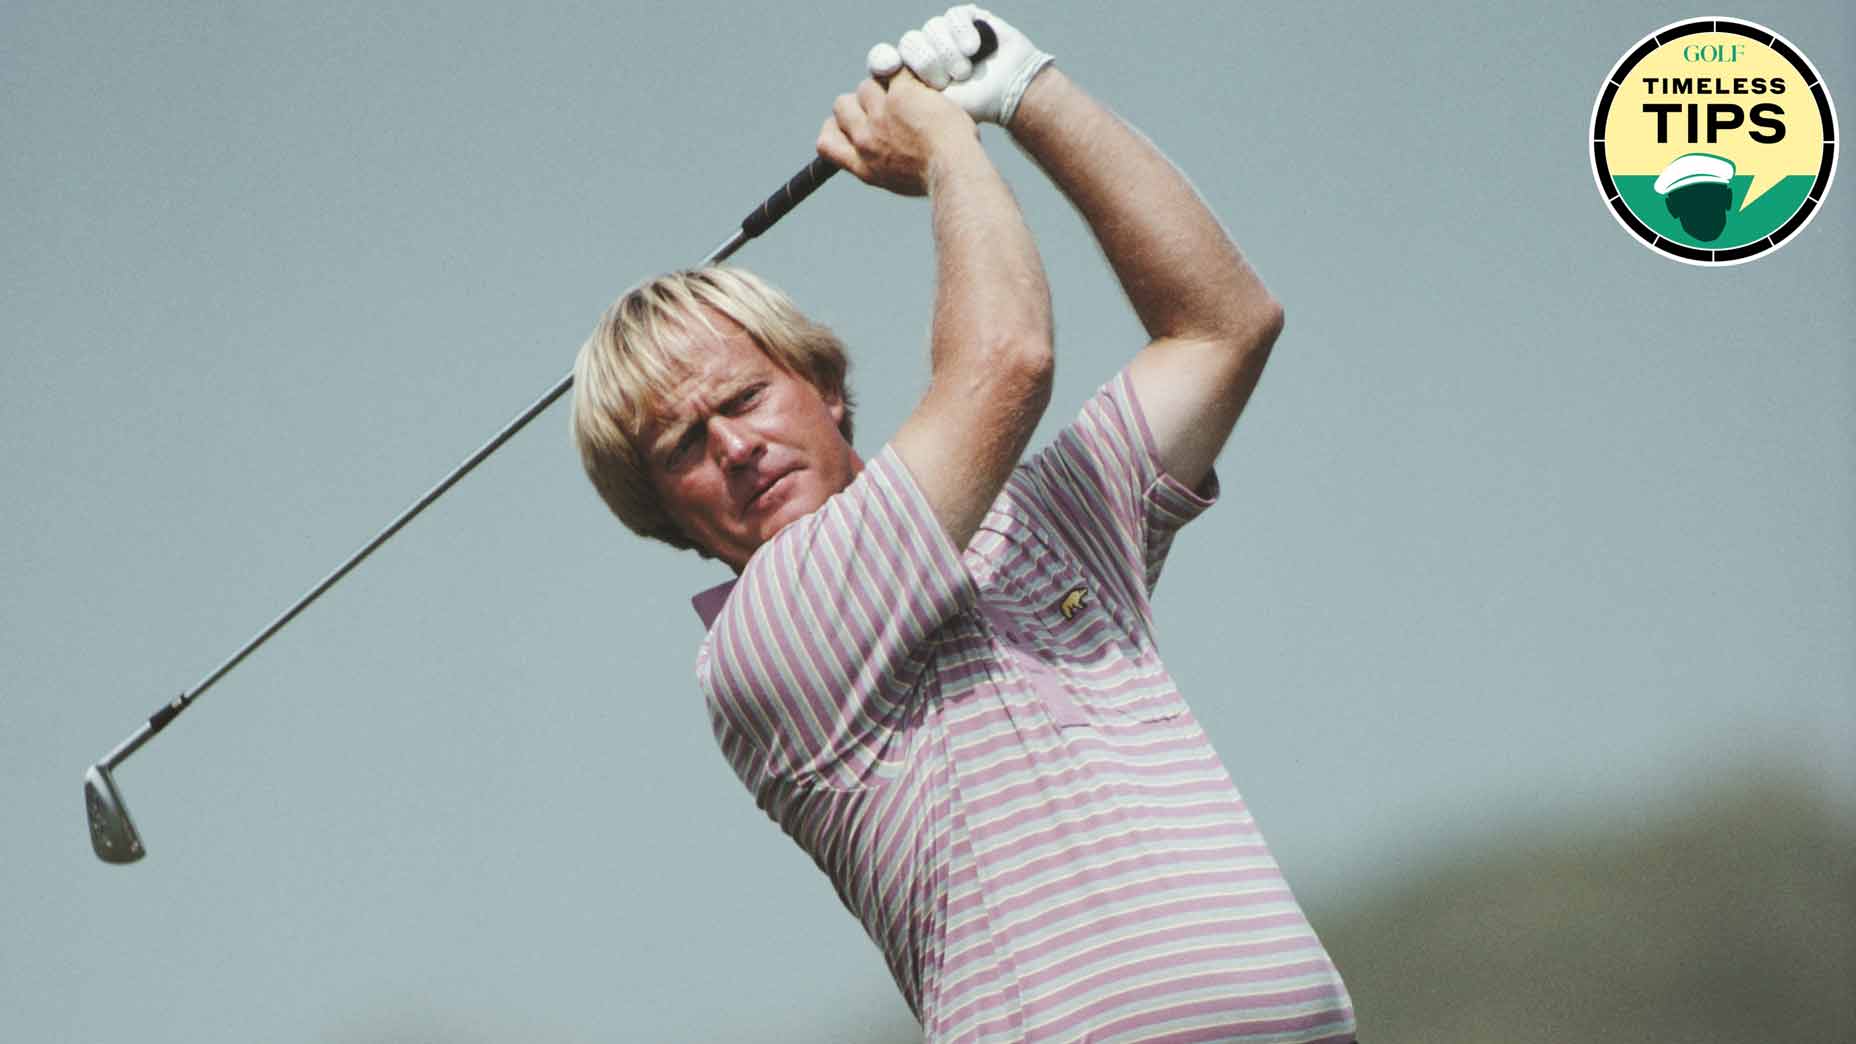 jack nicklaus swings an iron during the 1983 open championship